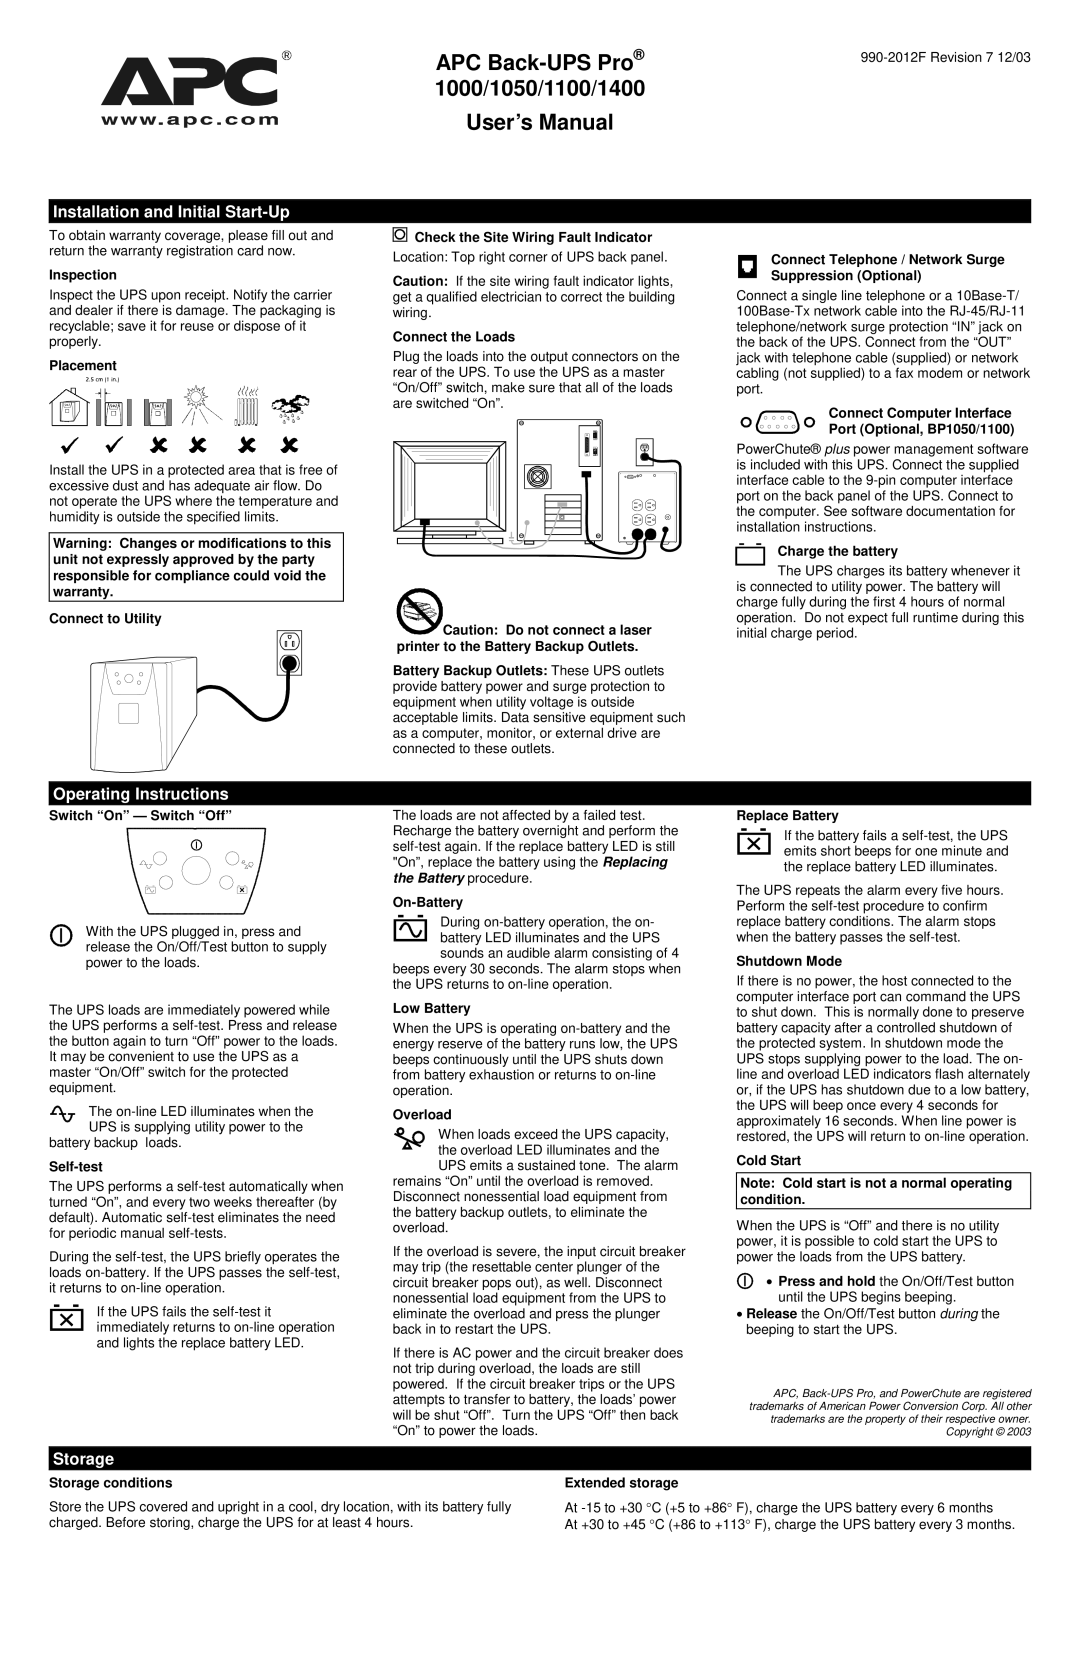 American Power Conversion 1050 operating instructions Installation and Initial Start-Up, Operating Instructions, Storage 